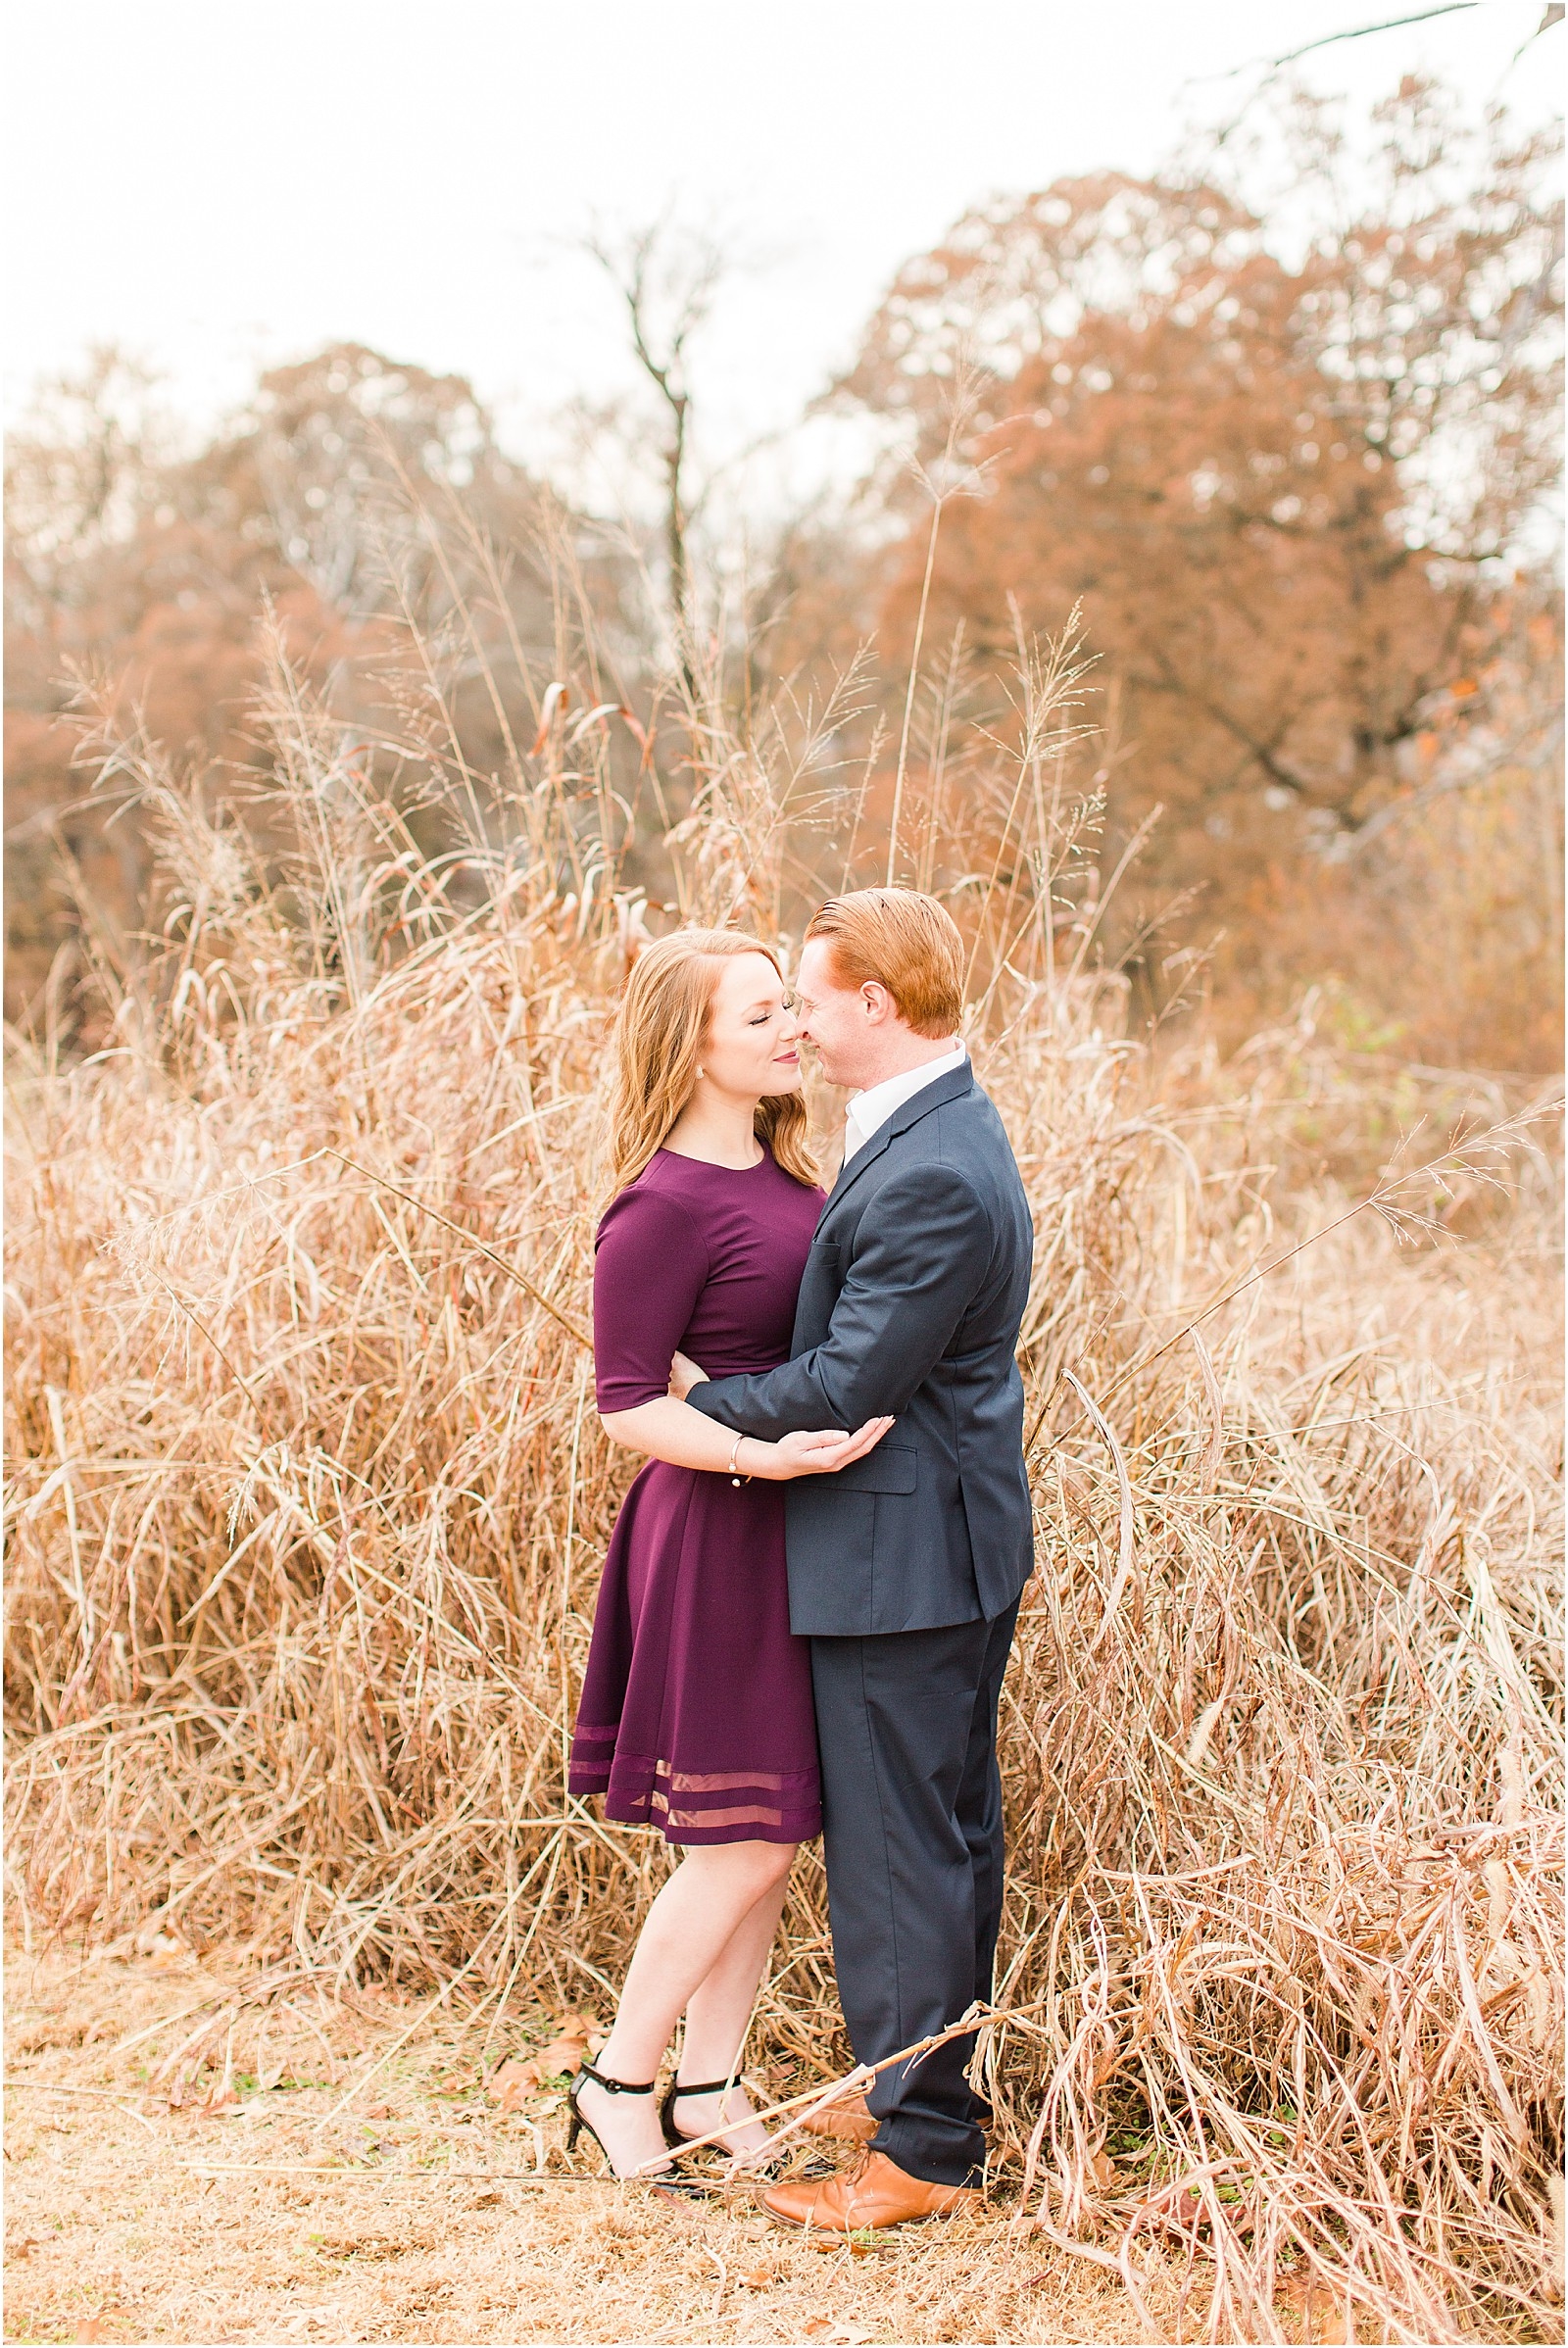 A Mesker Park Zoo Engagement Session | Jennah and Steve | Bret and Brandie Photography004.jpg